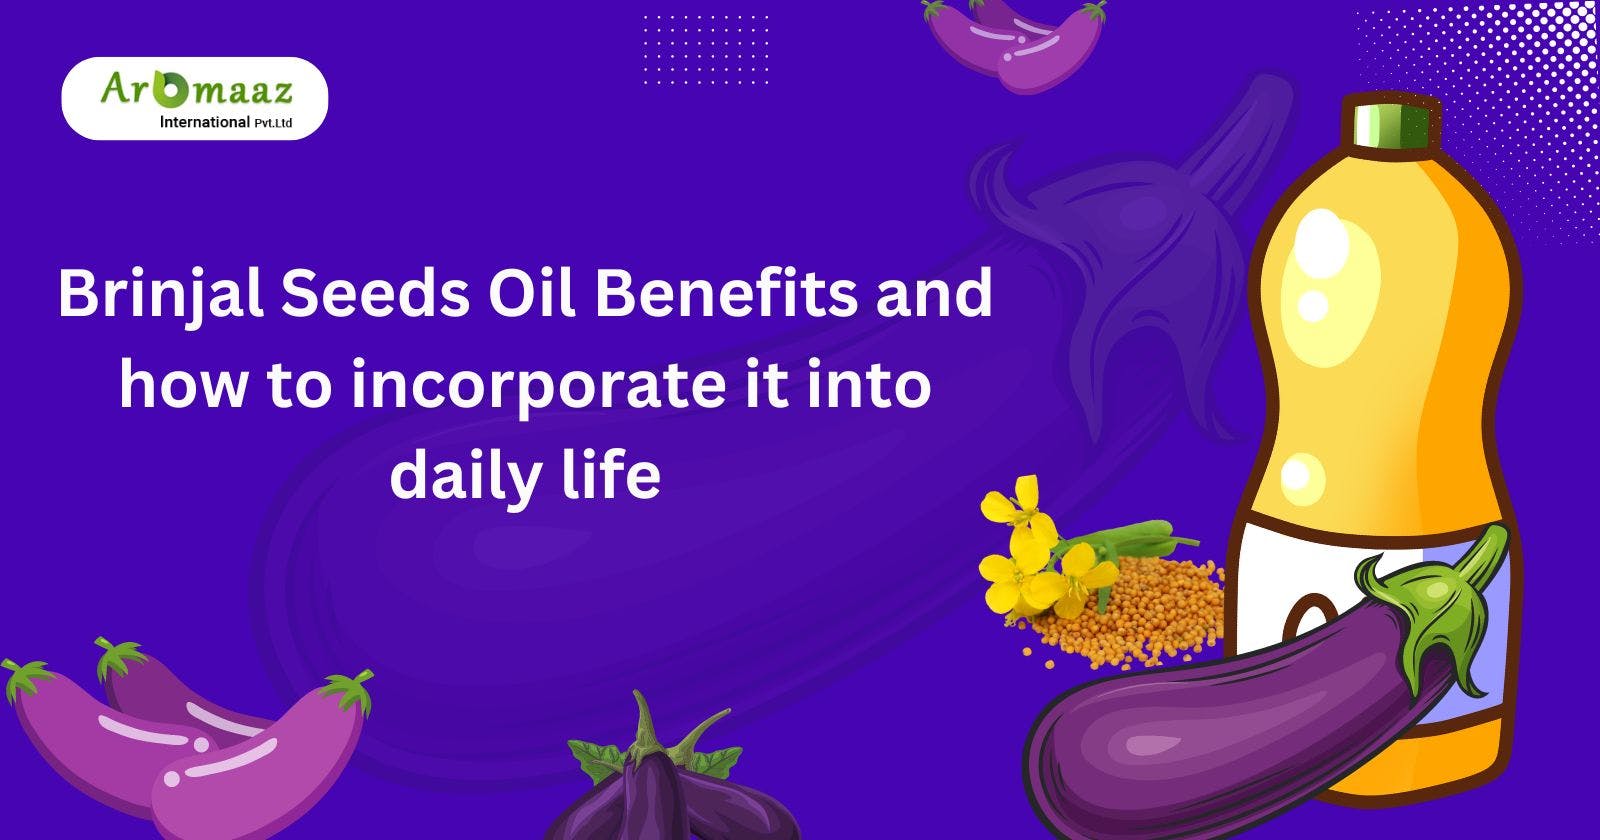 Brinjal Seeds Oil Benefits and how to incorporate it into daily life.